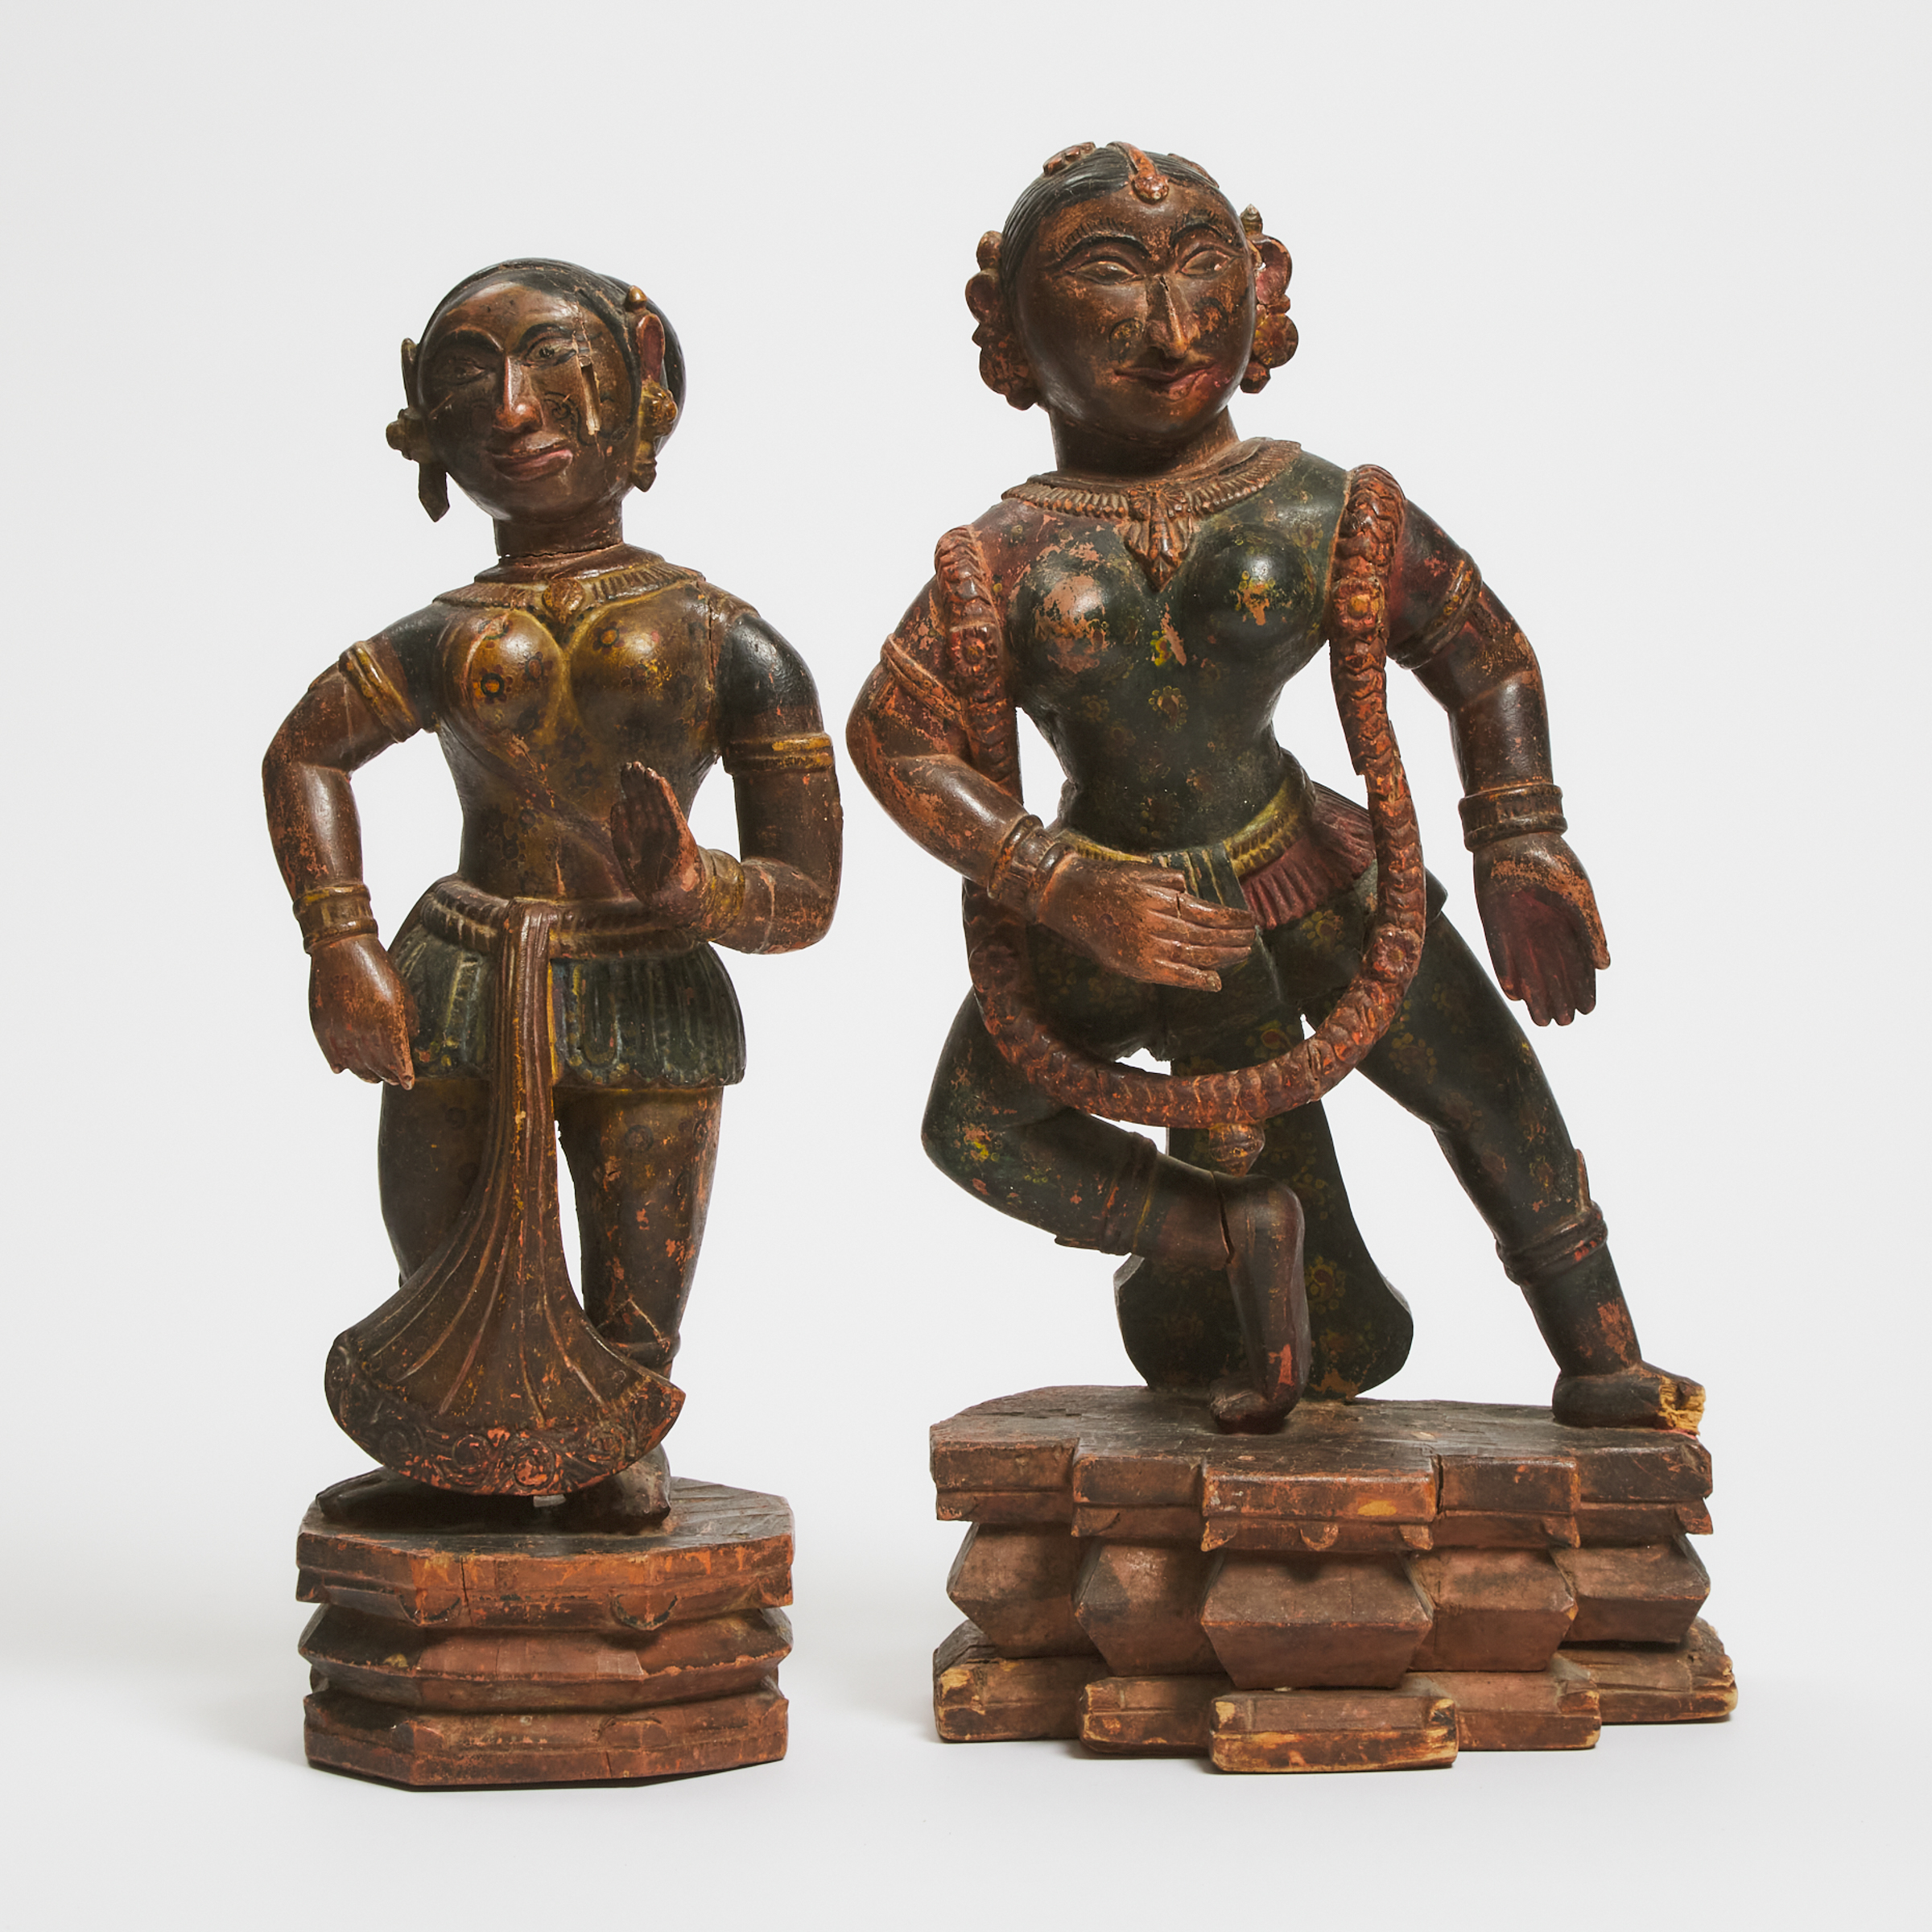 A Pair of Indian Painted Wood Figures of Female Dancers, 18th/19th Century